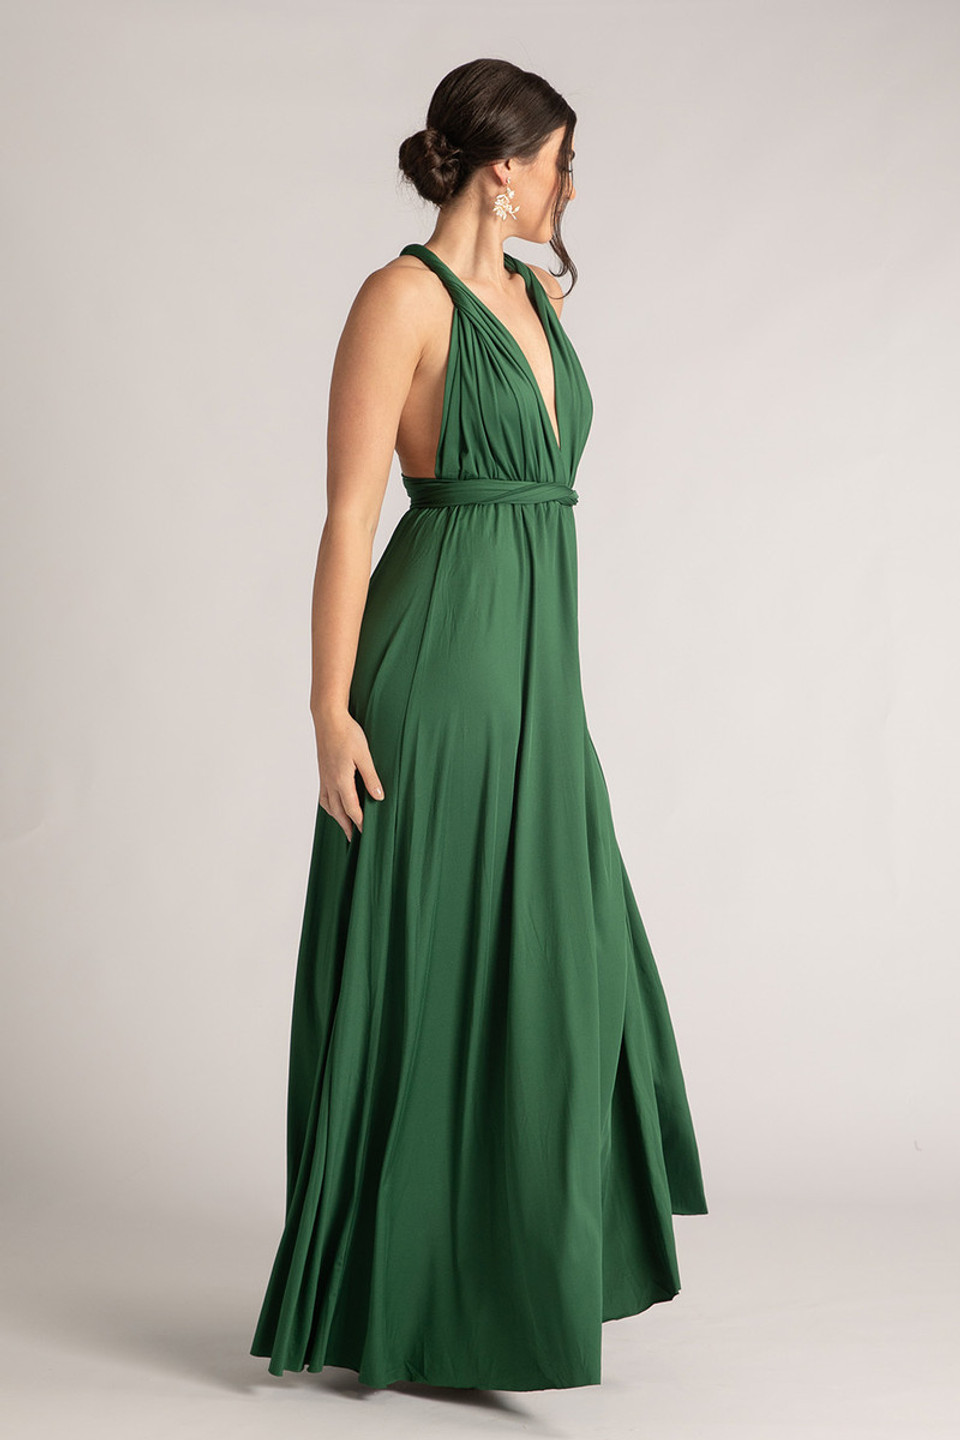 Classic Multiway Infinity Dress in Emerald Green - Evening Dresses ...